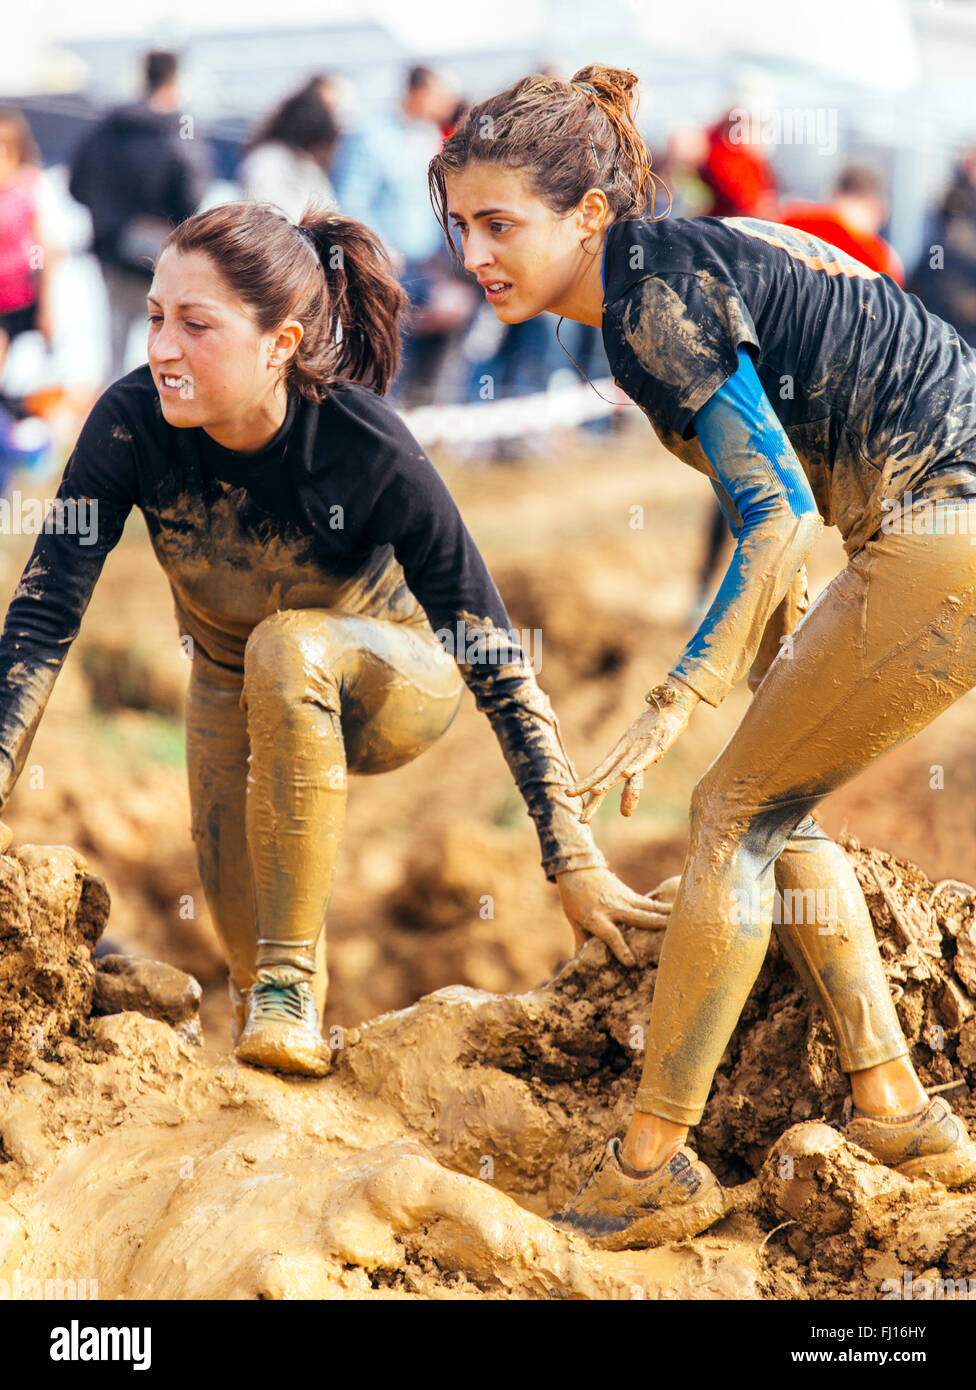 Participants in extreme obstacle race, running through mud Stock Photo